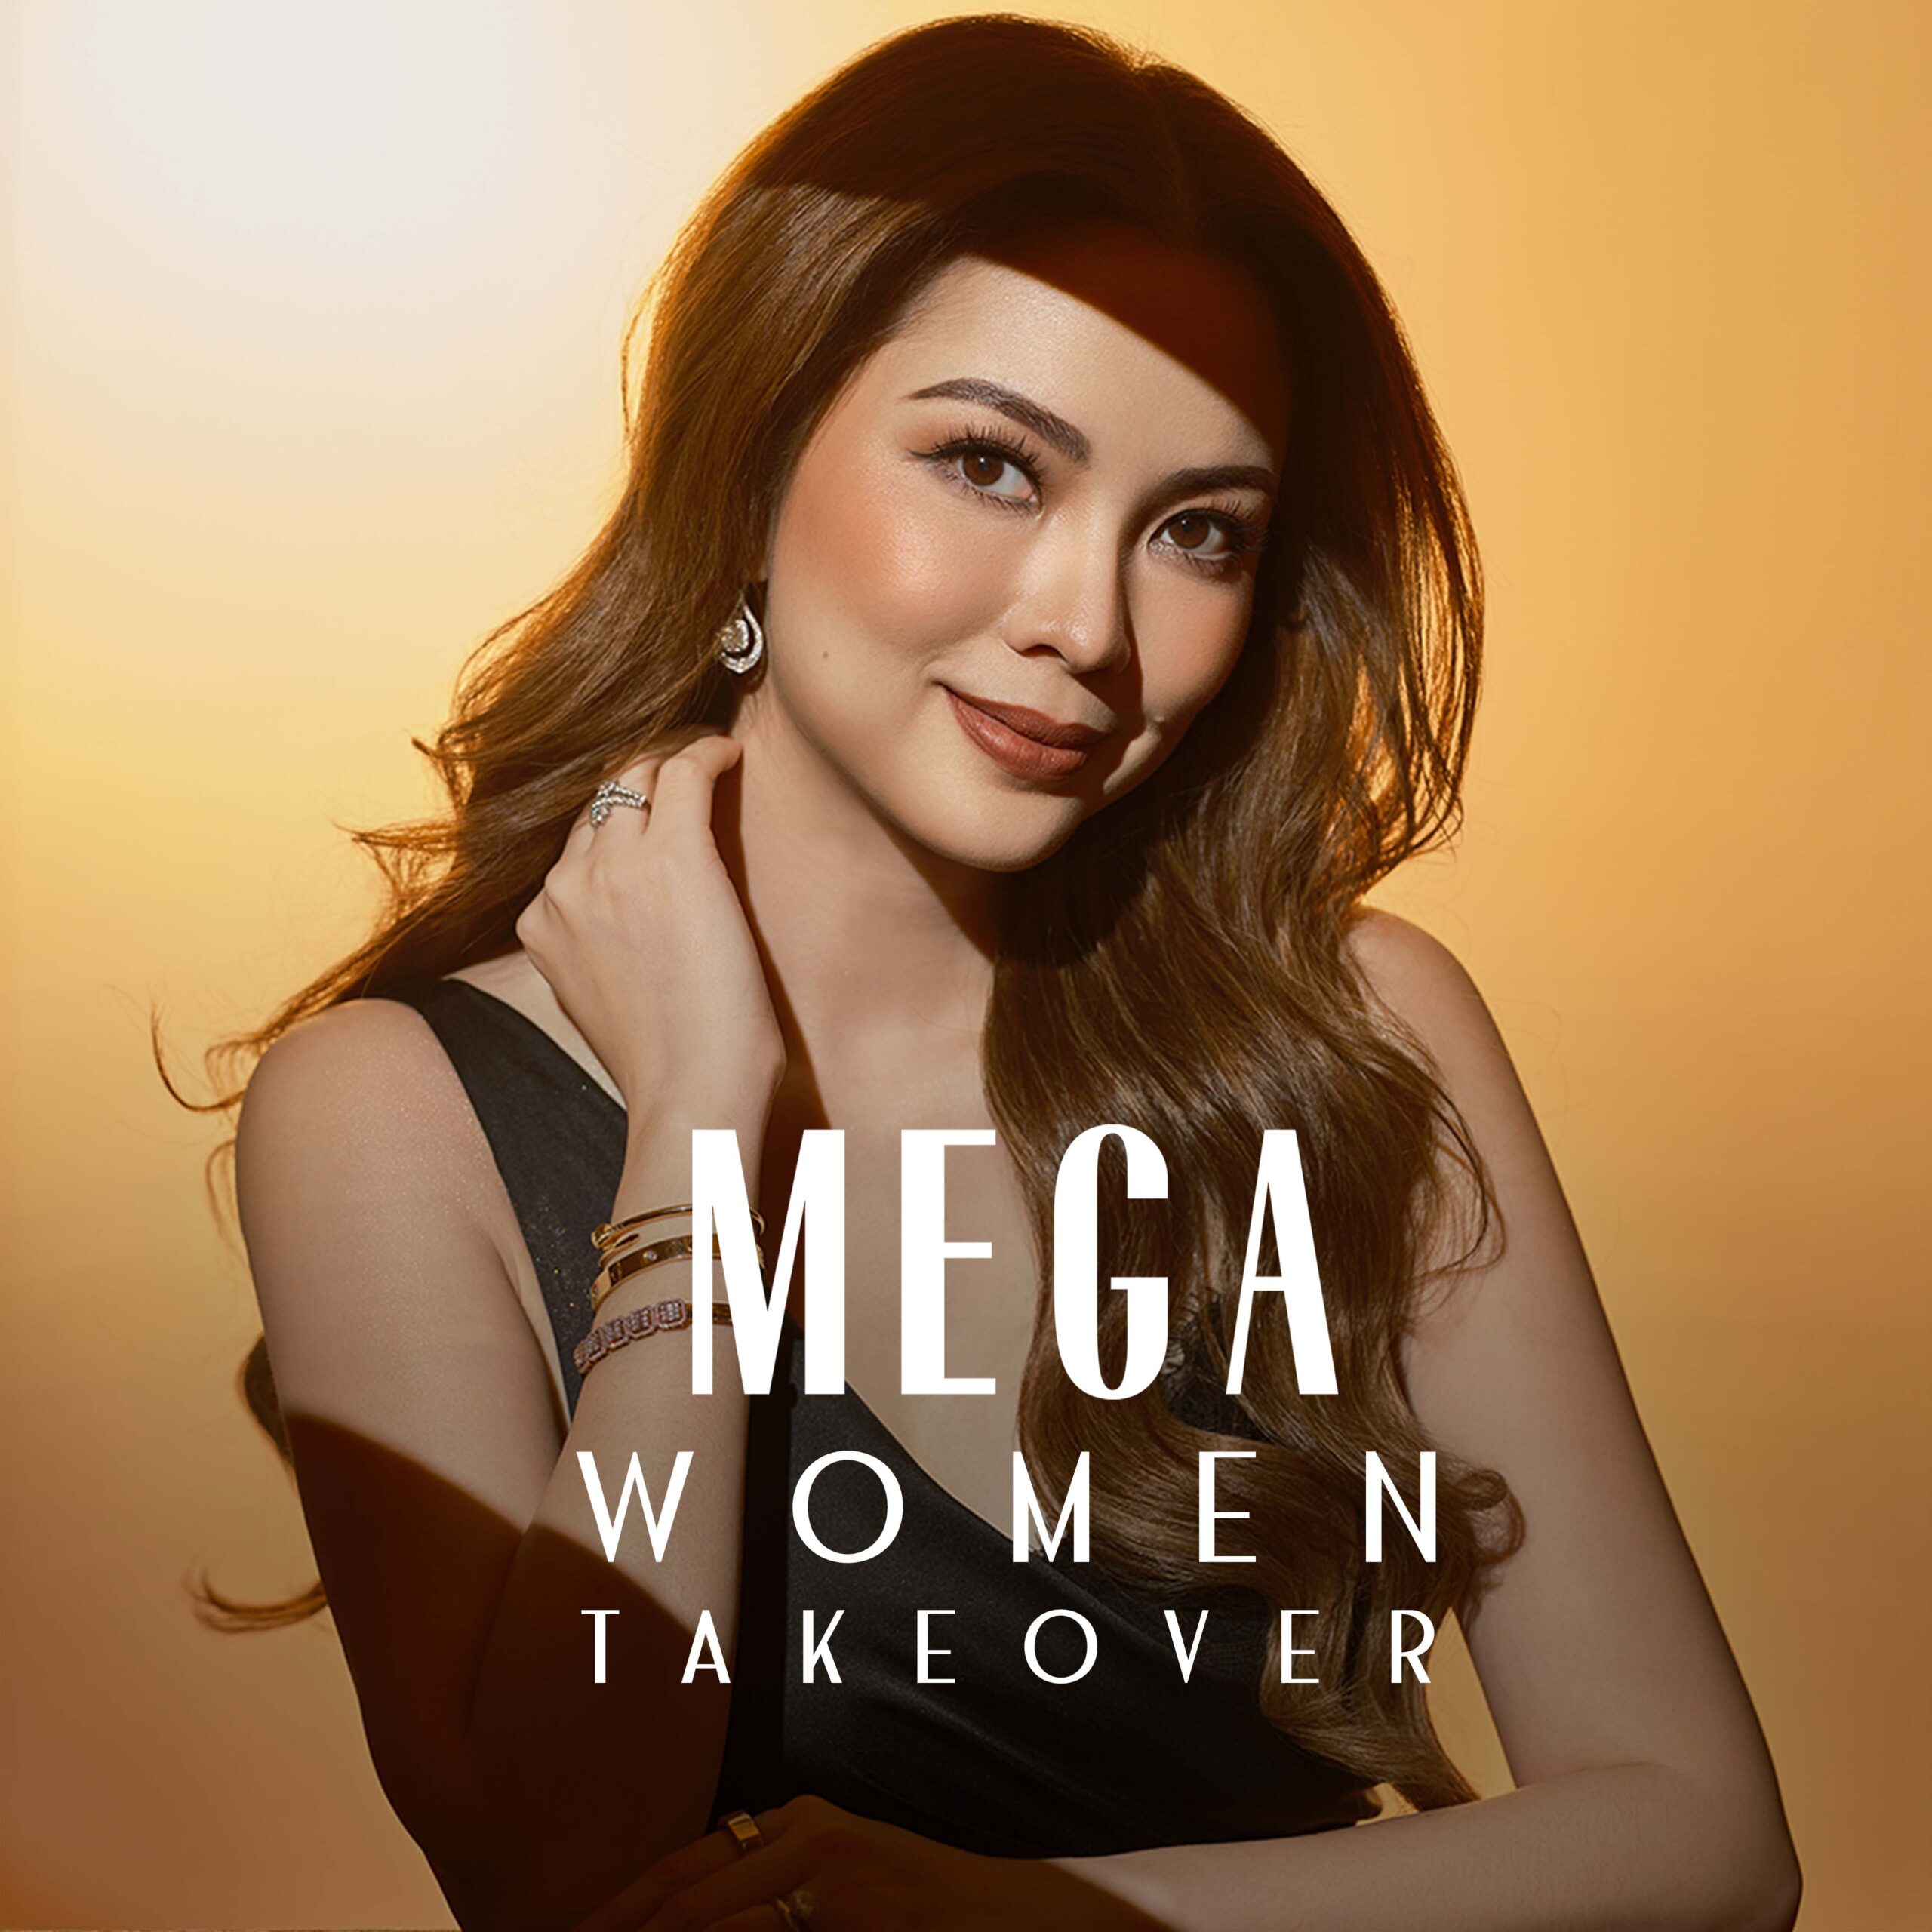 MEGA Women Takeover: Bambi Del Rosario Young is Giving What Women Want in Beauty and Wellness